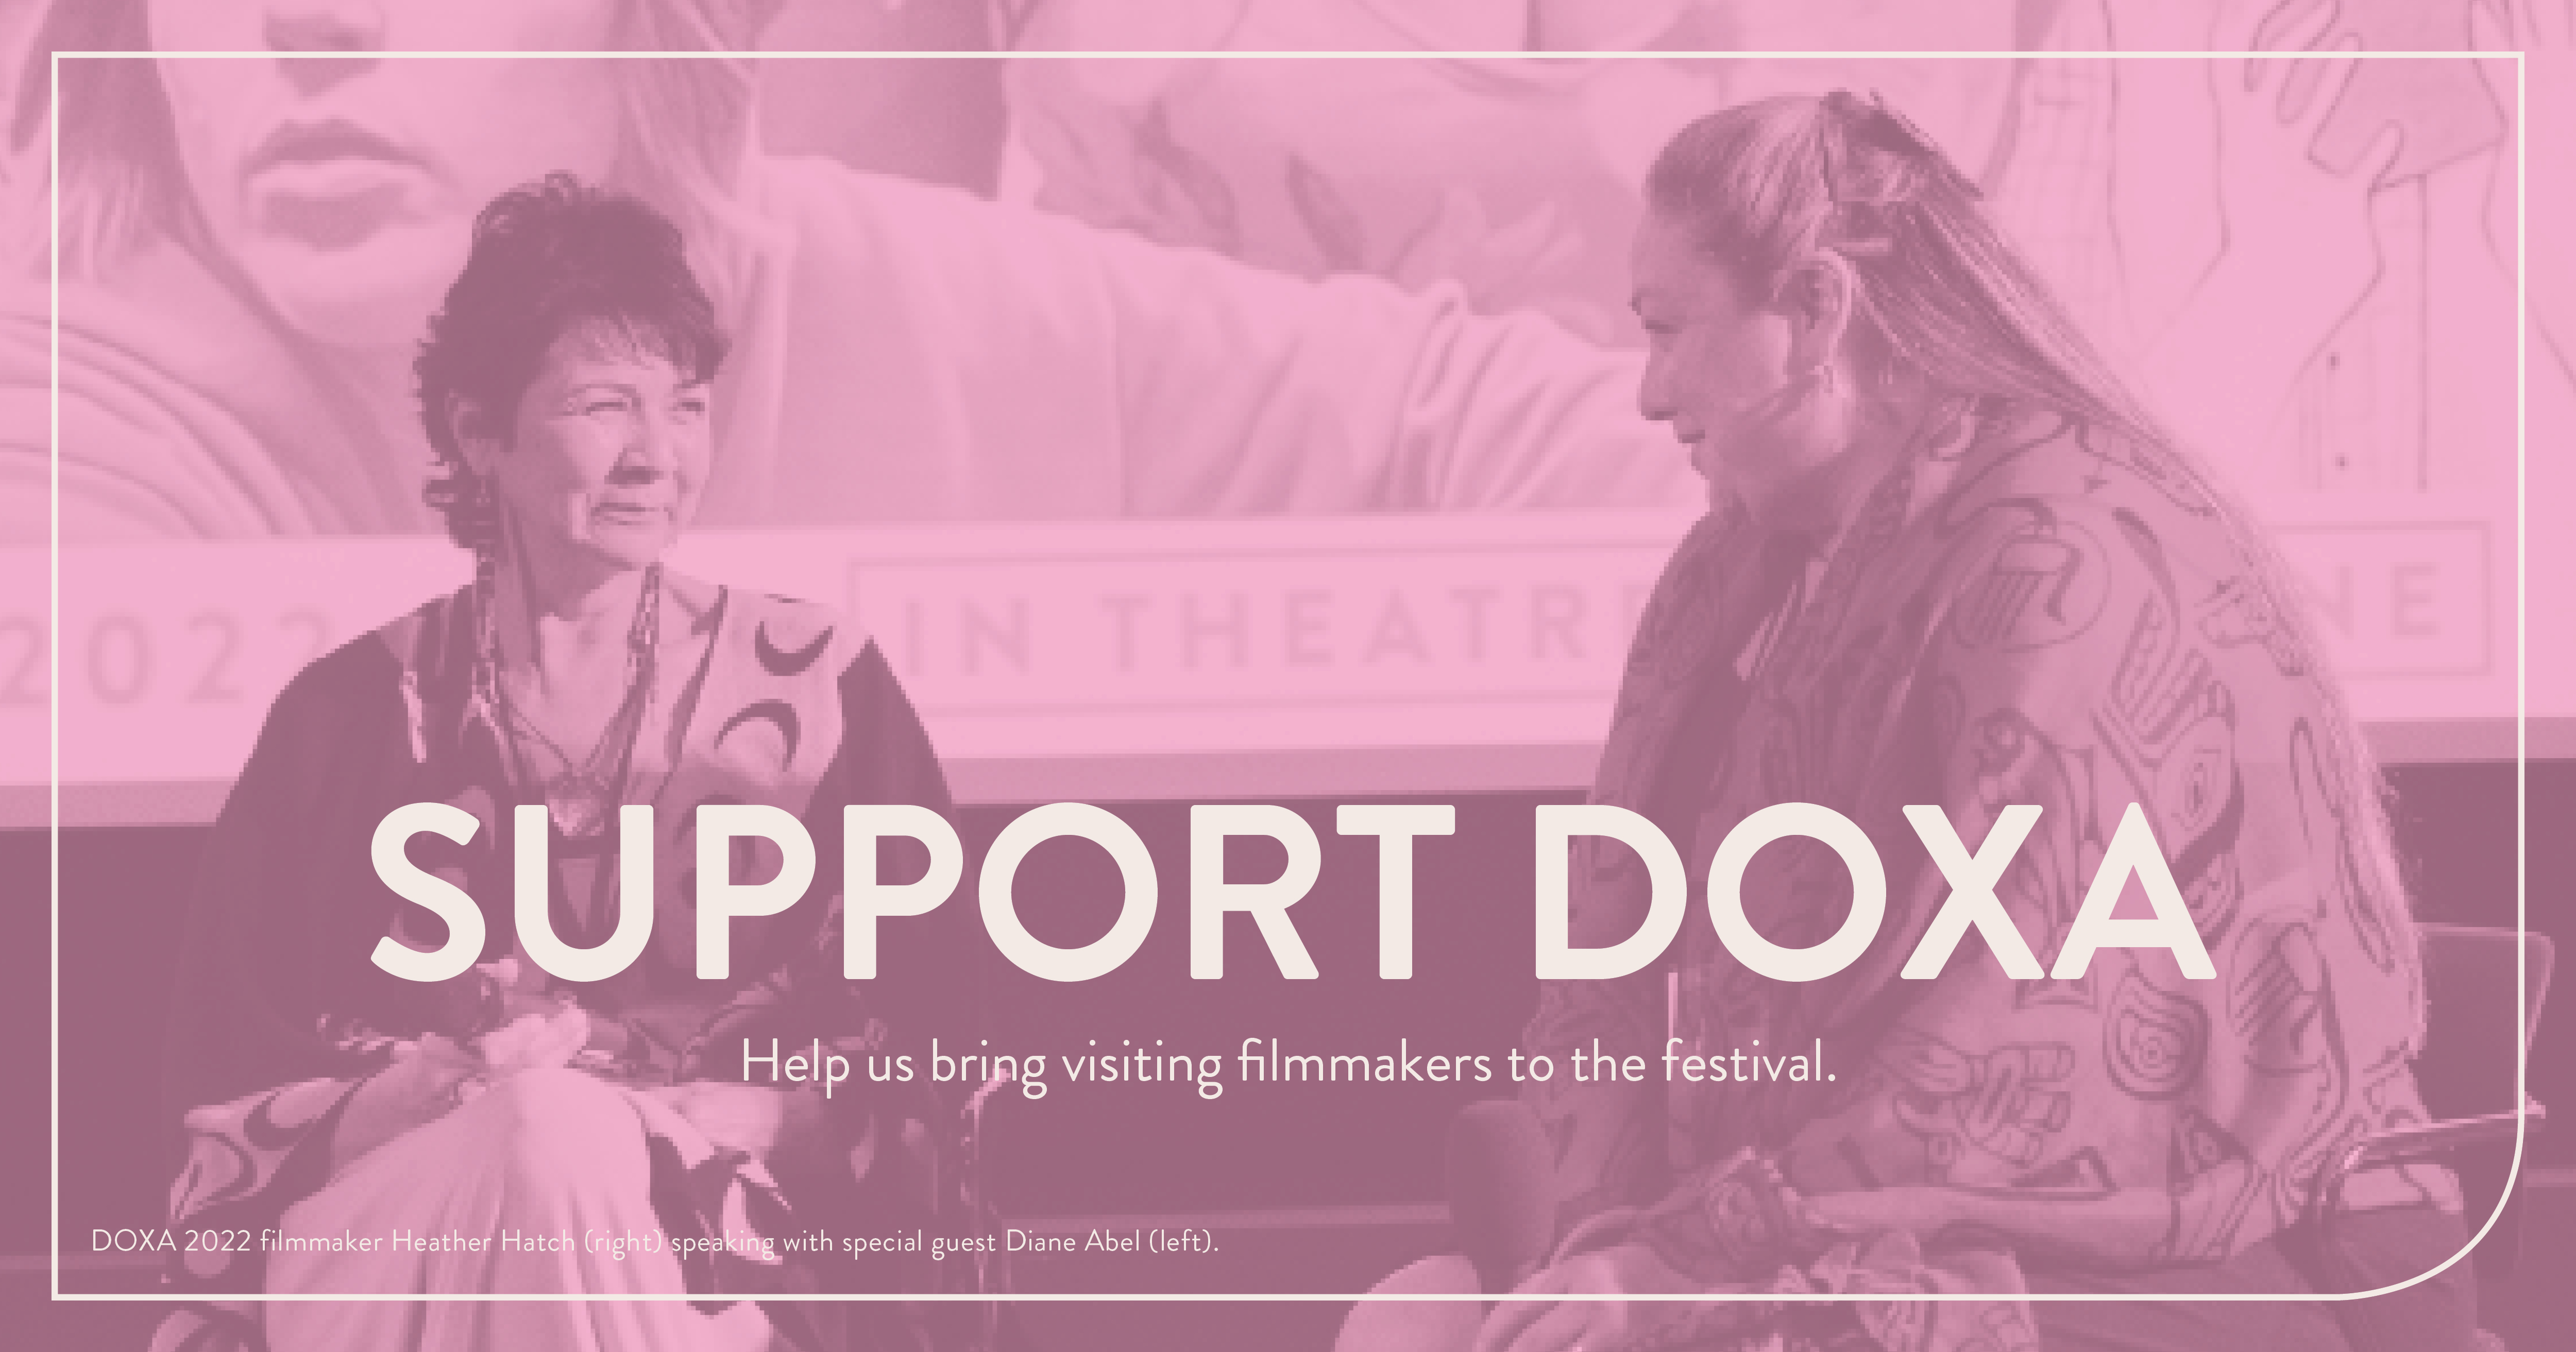 A photograph of two Indigenous looking at each other and smiling, with the DOXA 2022 key art on the theatre screen behind them. The image is tinted pink, with white text overtop that reads: SUPPORT DOXA